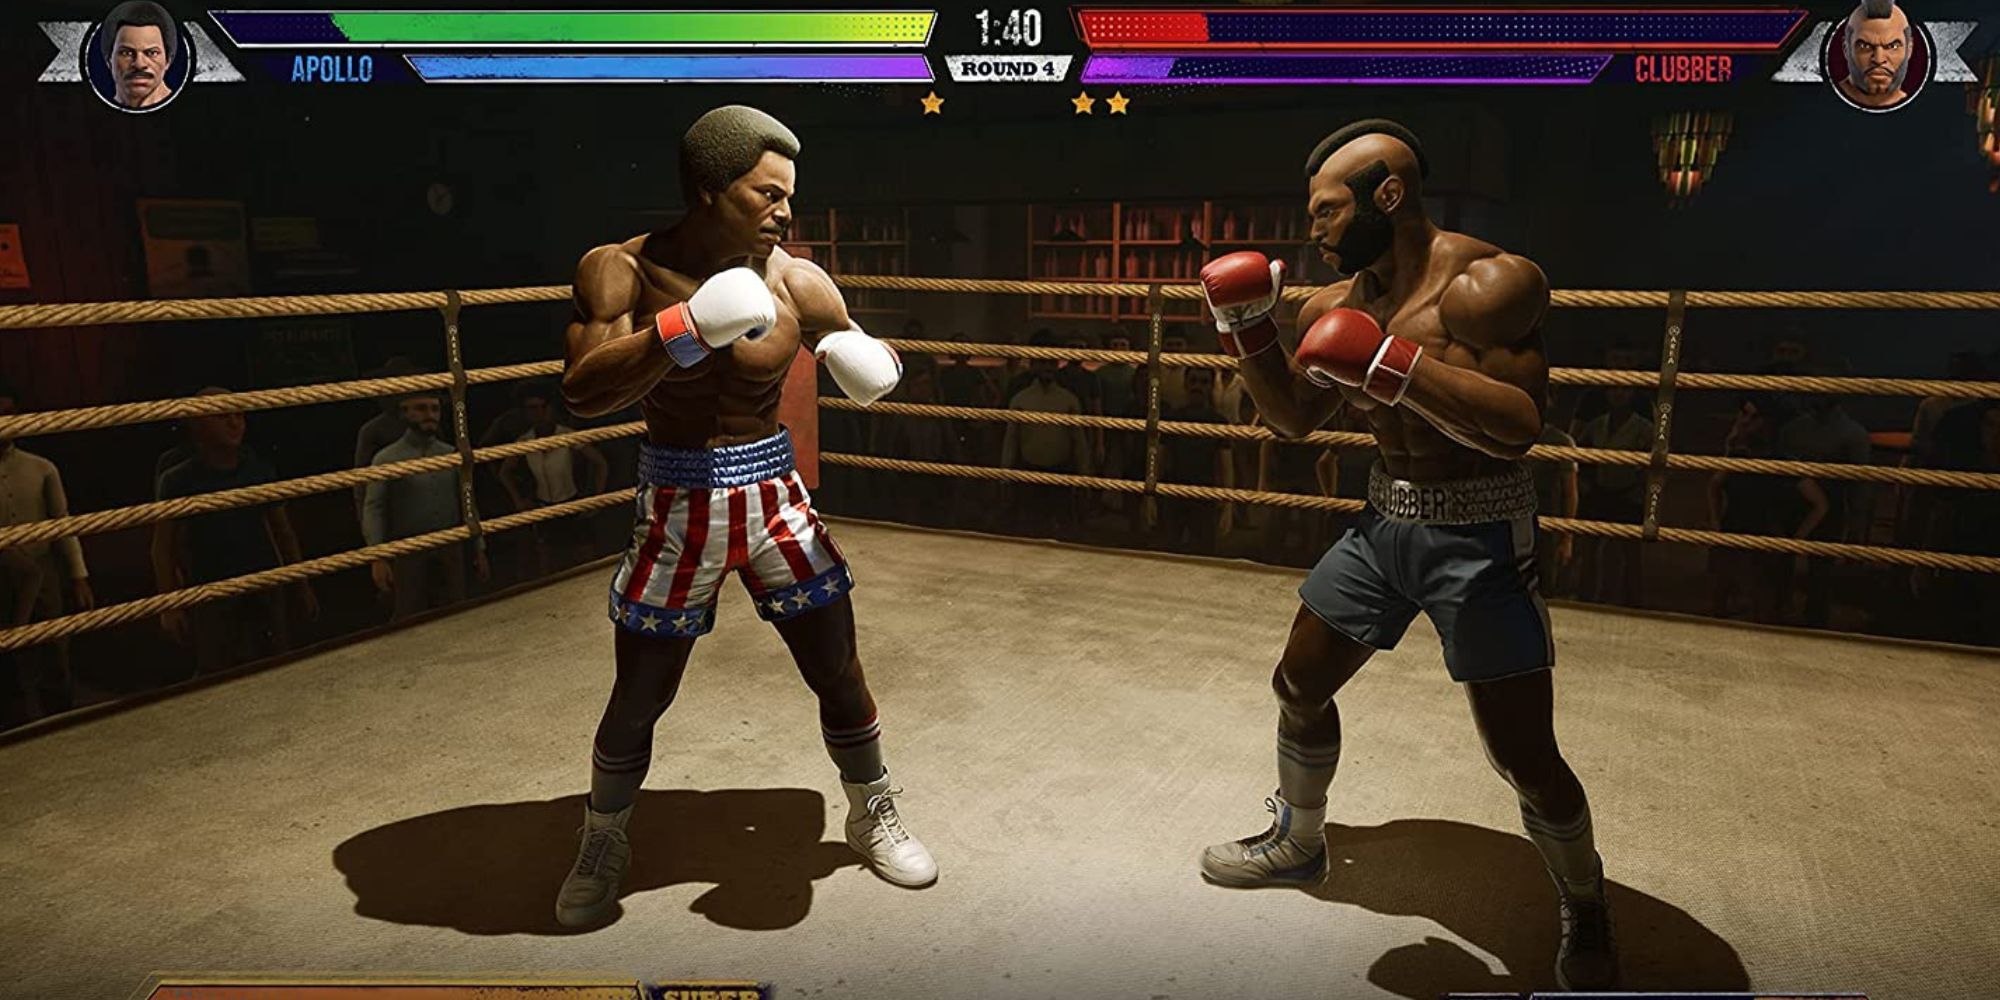 Apollo Creed faces off against Clubber Lang in the ring